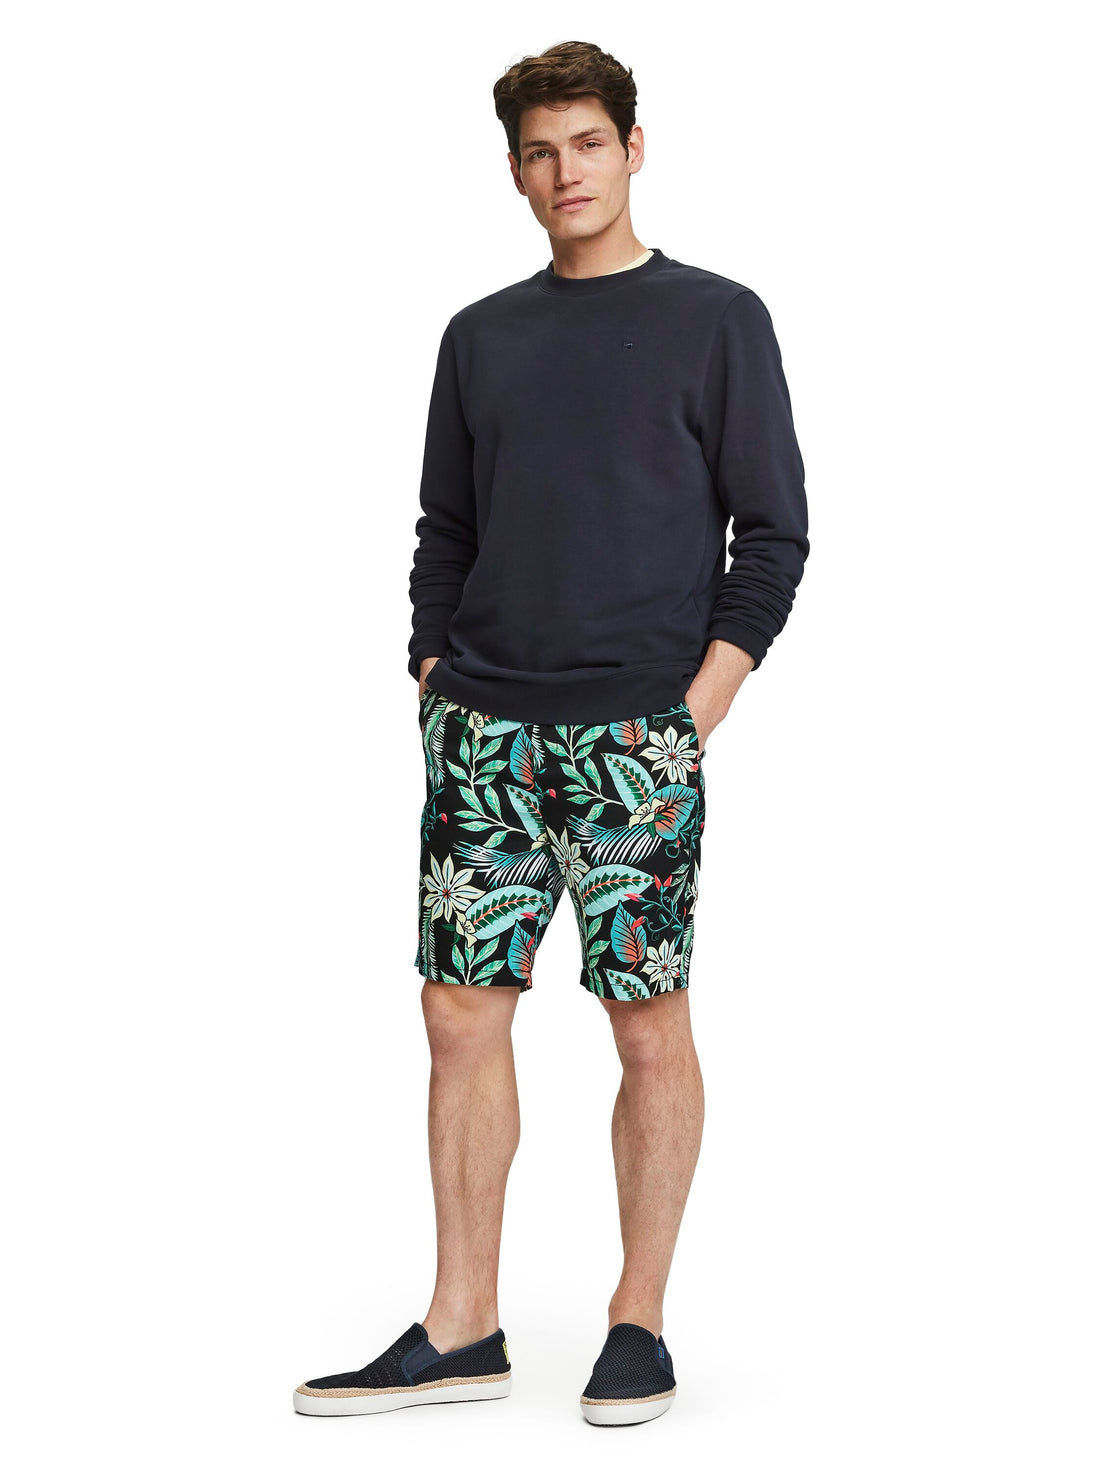 All-over Printed Chino Short - Two Designs 155083